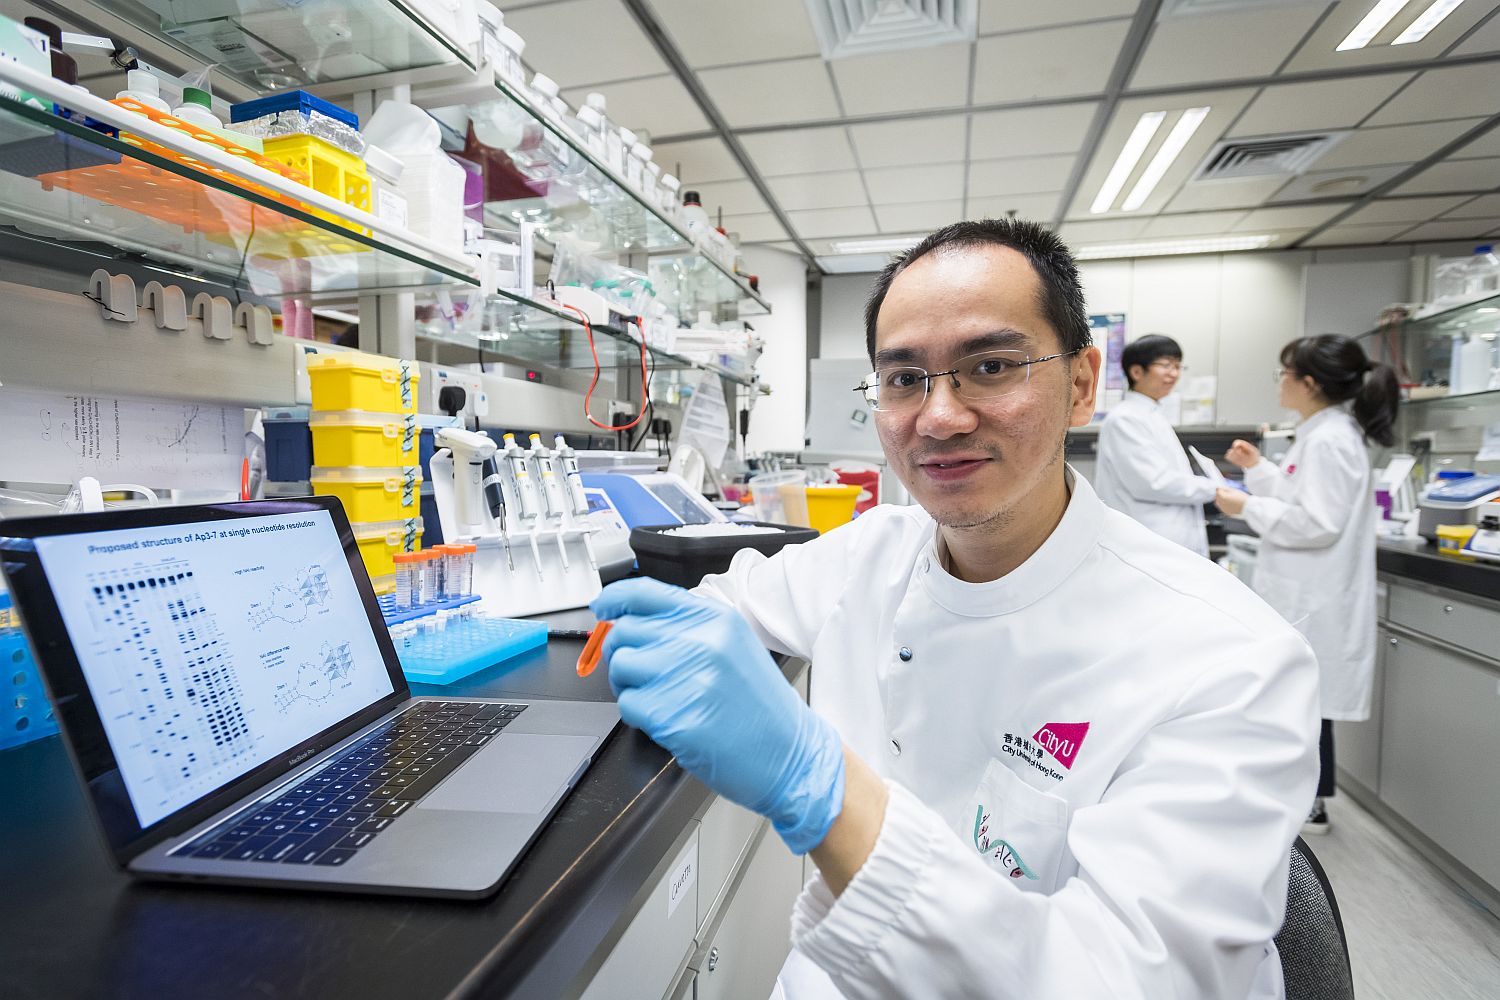 Dr Kwok plans to spend the Award grant mainly on exploring the interactions of long non-coding RNAs with other RNAs and proteins, as well as their functions in the process of cell division.